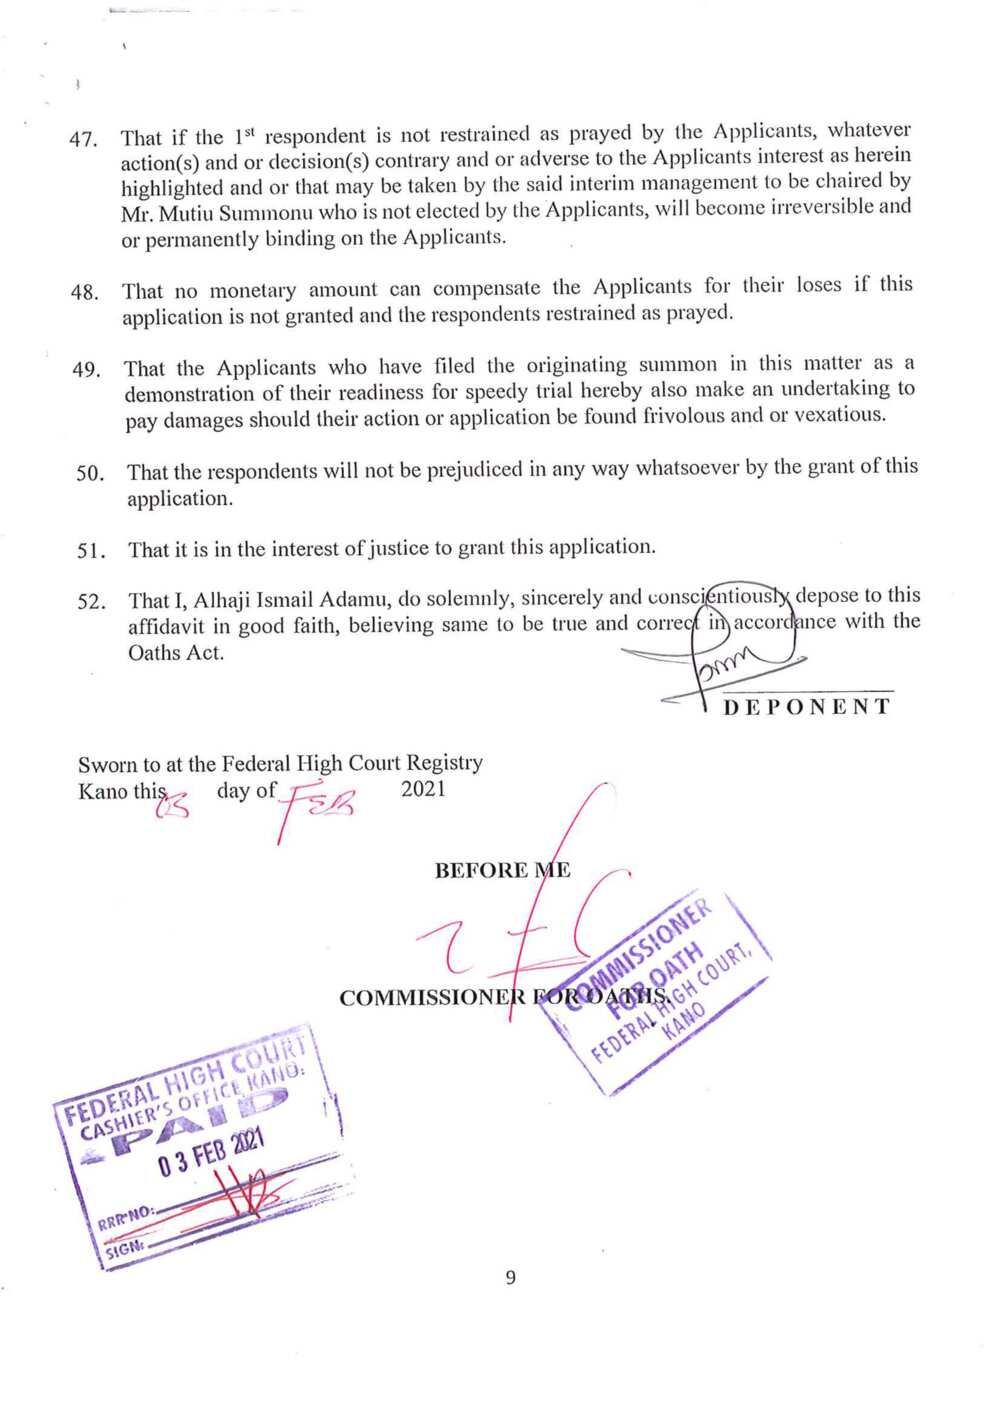 Oando shareholders have taken SEC to court to challenge penalties against Oando in May 31st letter